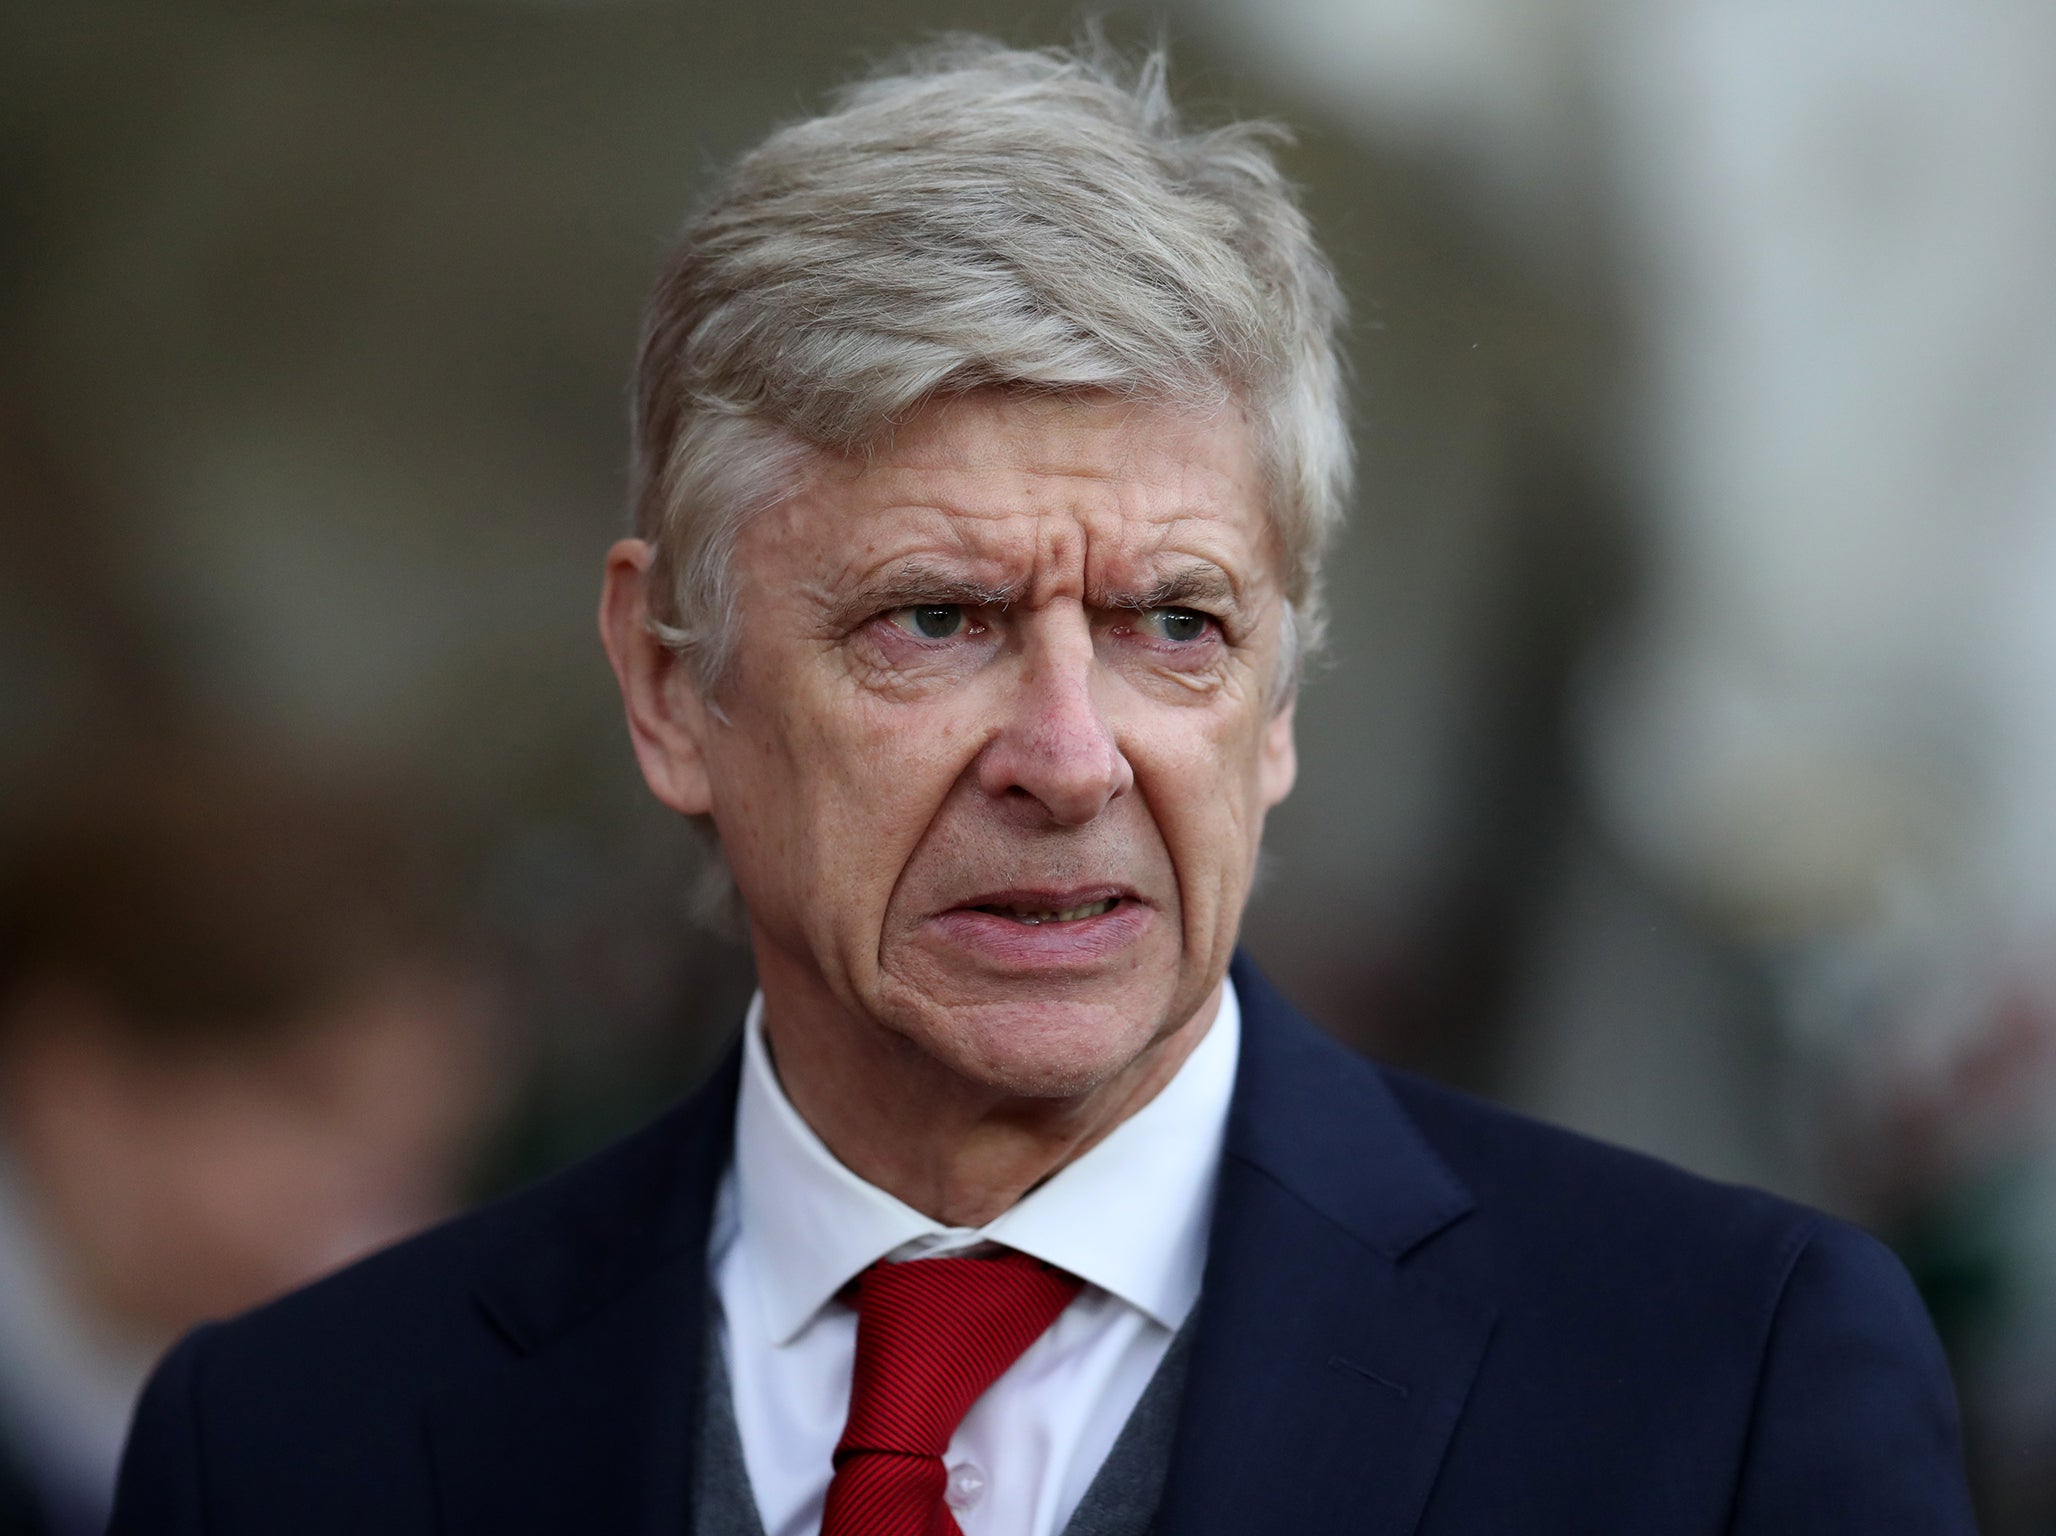 Arsene Wenger has been struggling financially against his biggest rivals for years